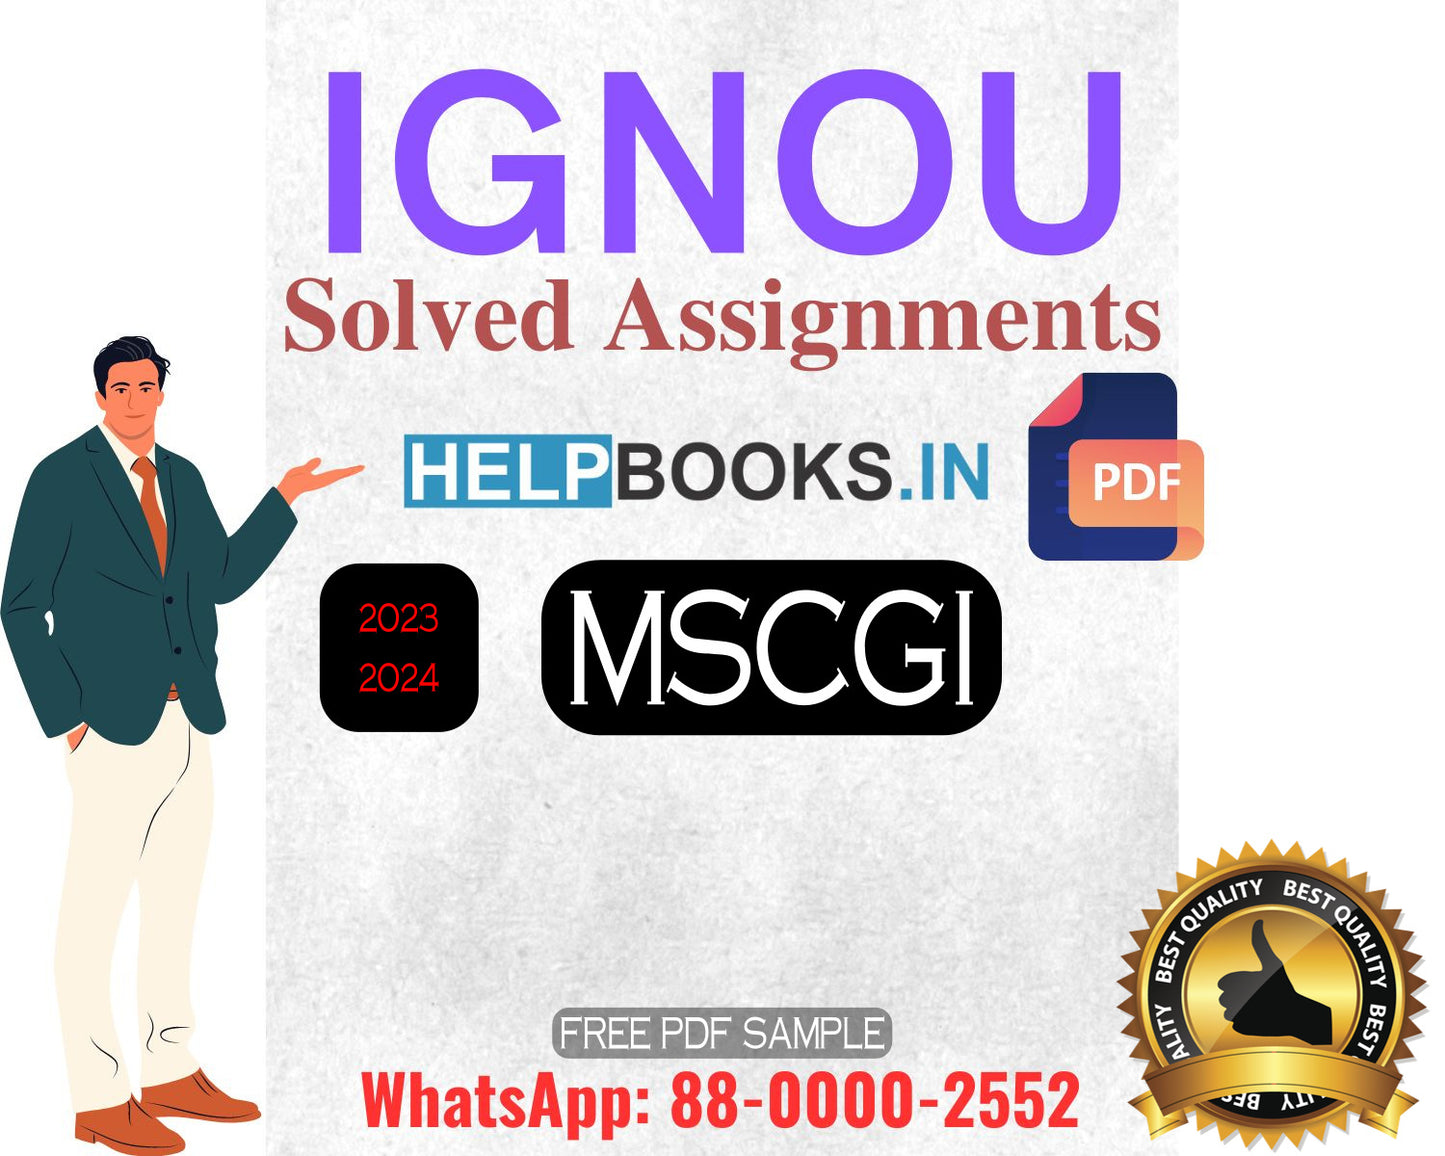 IGNOU Master's Degree Programme Latest IGNOU Solved Assignment 2023-24 & 2022-23 Sessions : MSCGI Master of Science Geoinformatics Solved Assignments